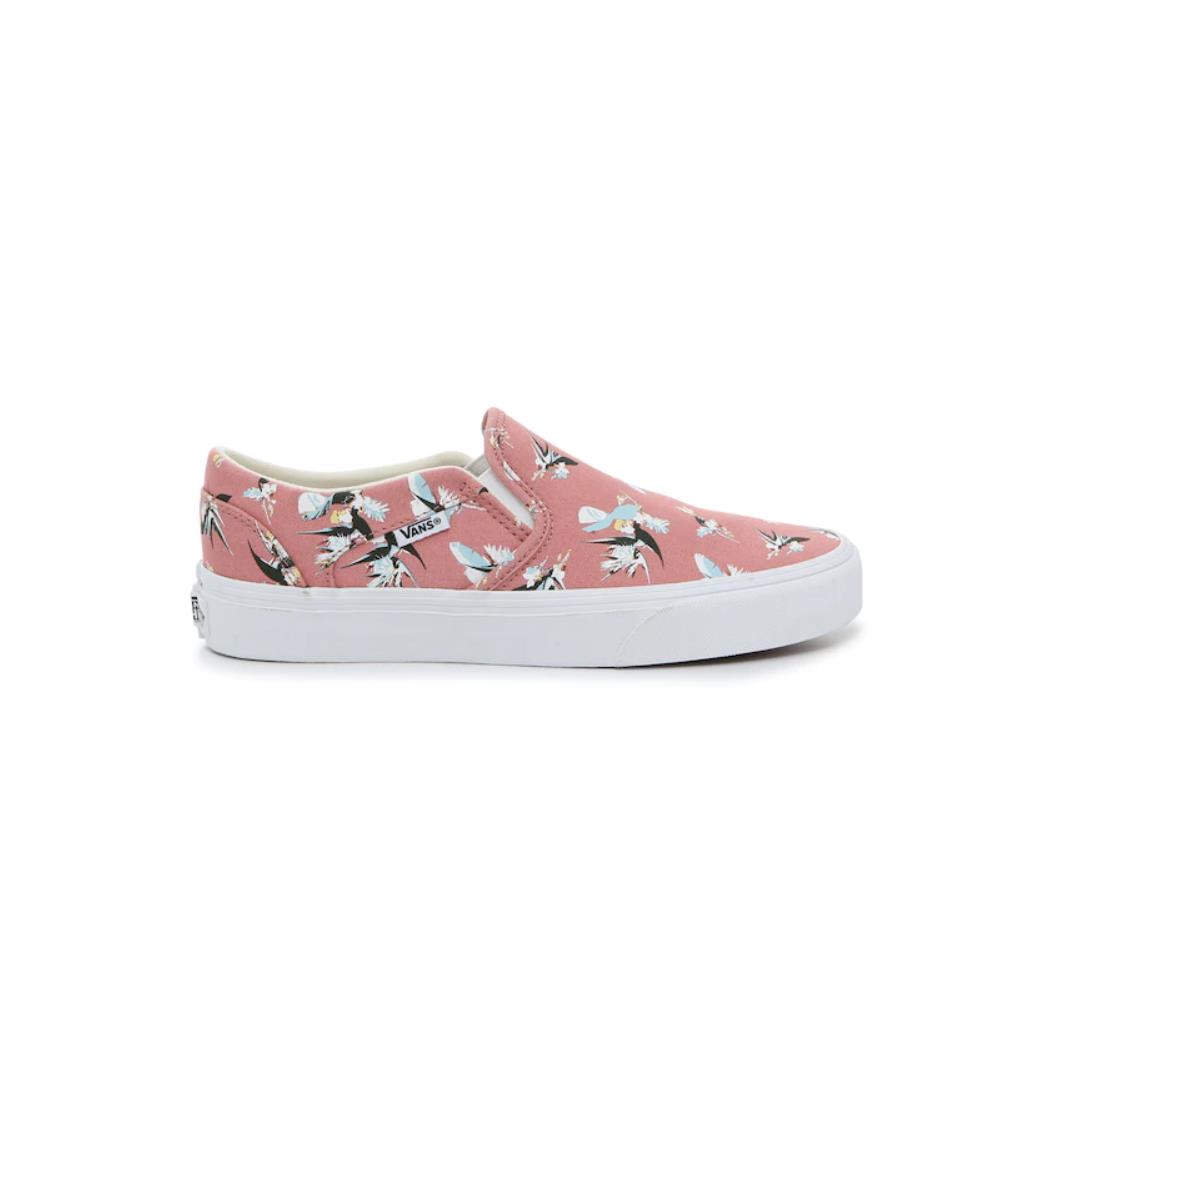 Vans shoes Asher - CORAL 4